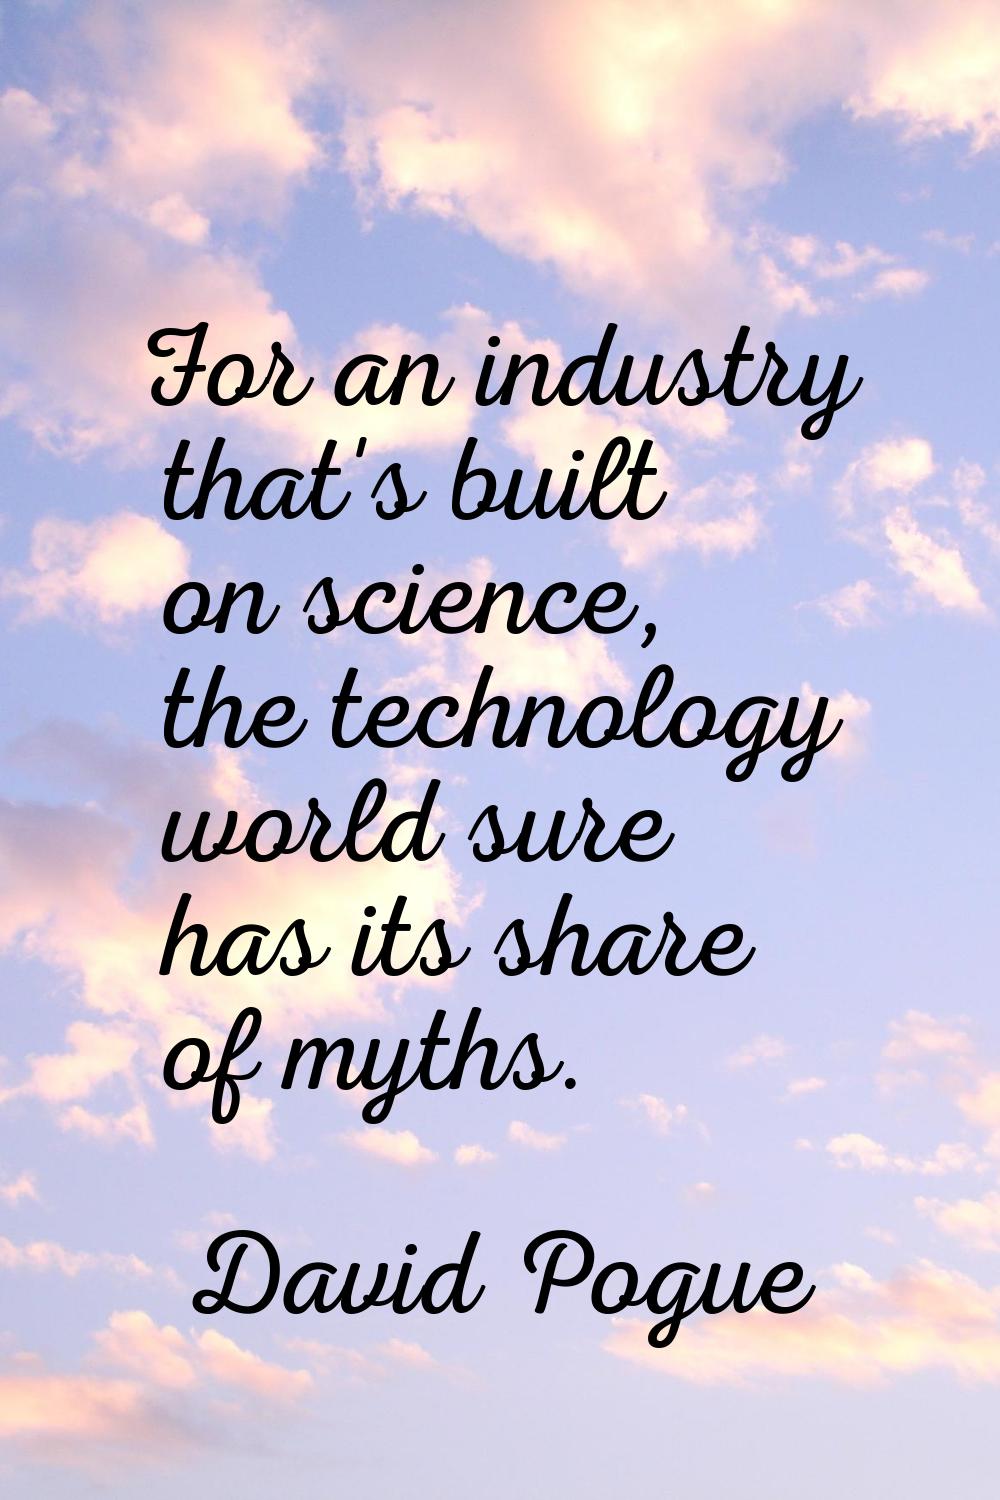 For an industry that's built on science, the technology world sure has its share of myths.